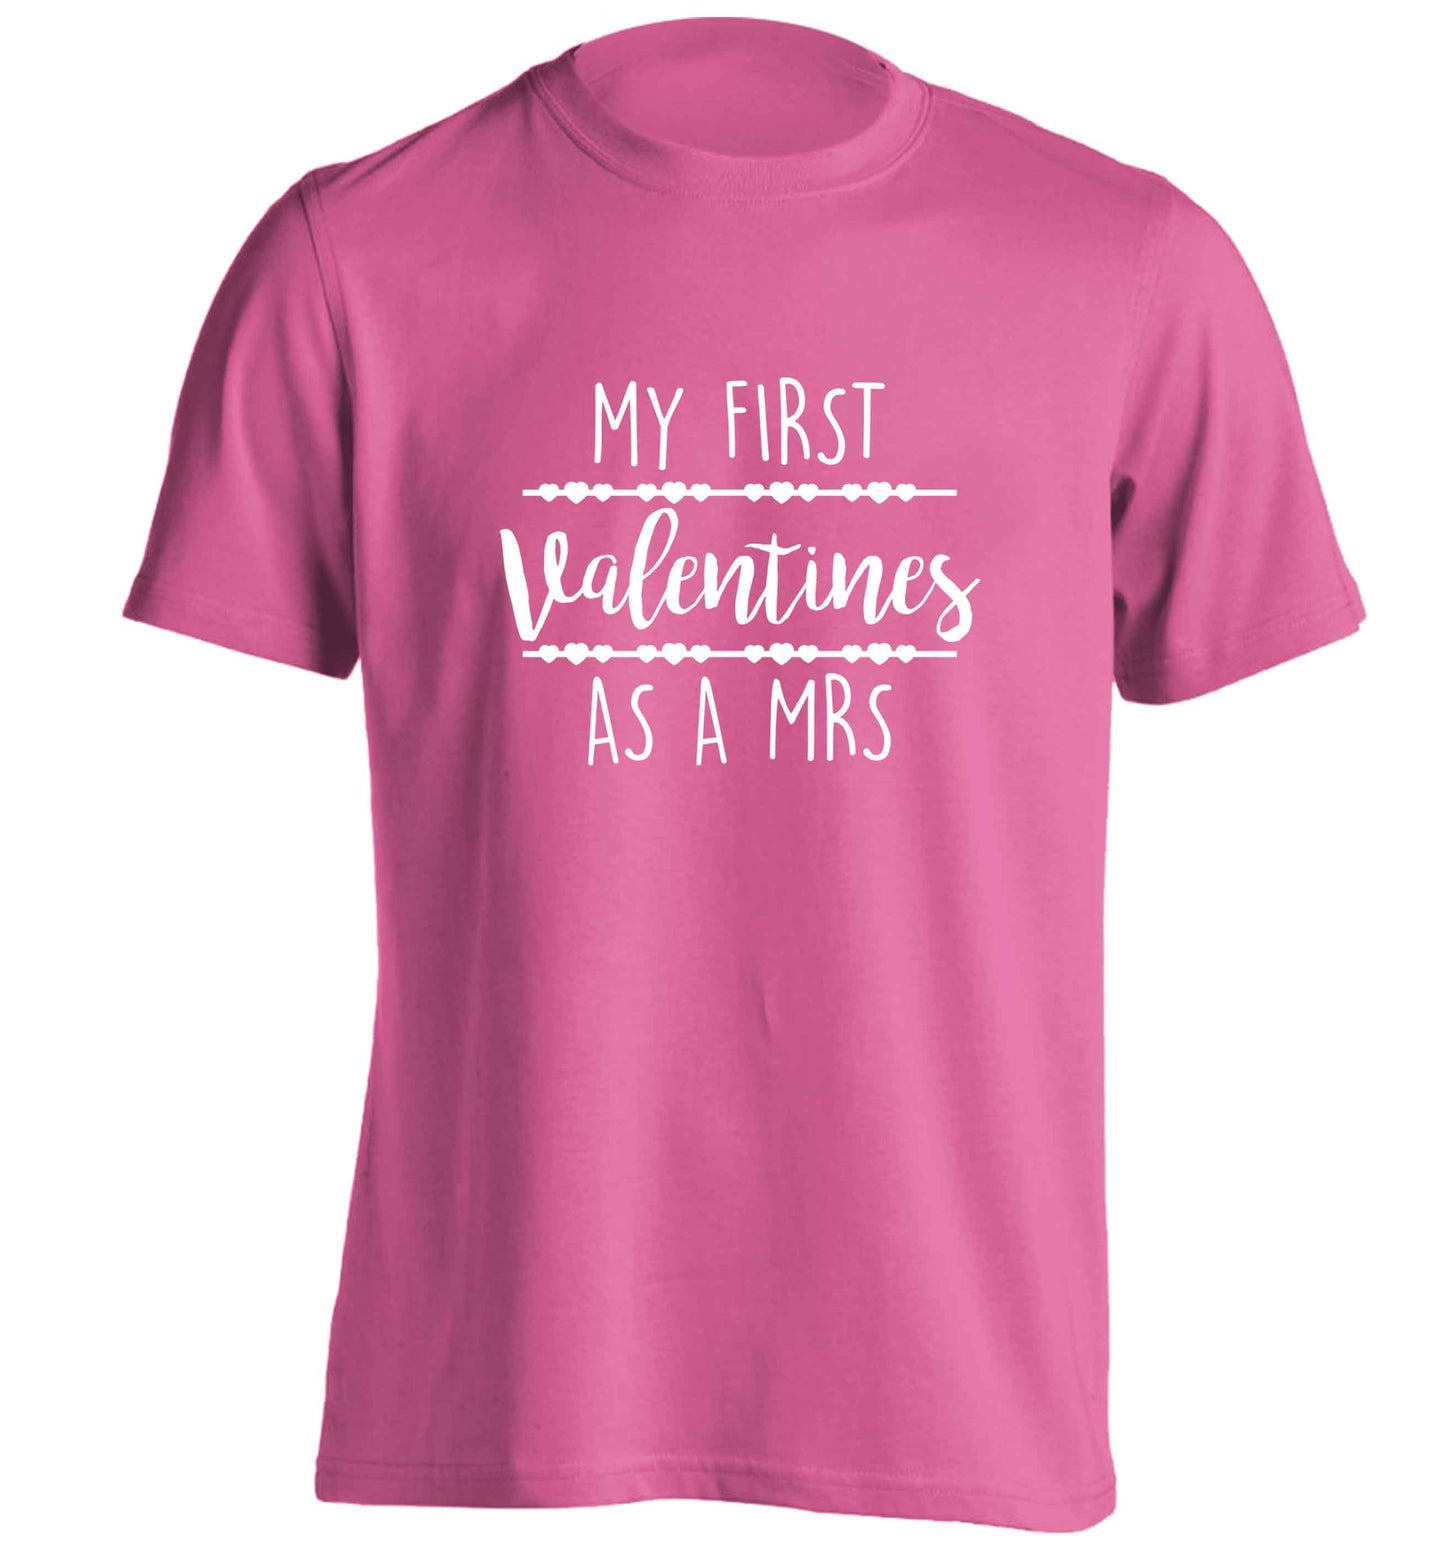 My first valentines as a Mrs adults unisex pink Tshirt 2XL